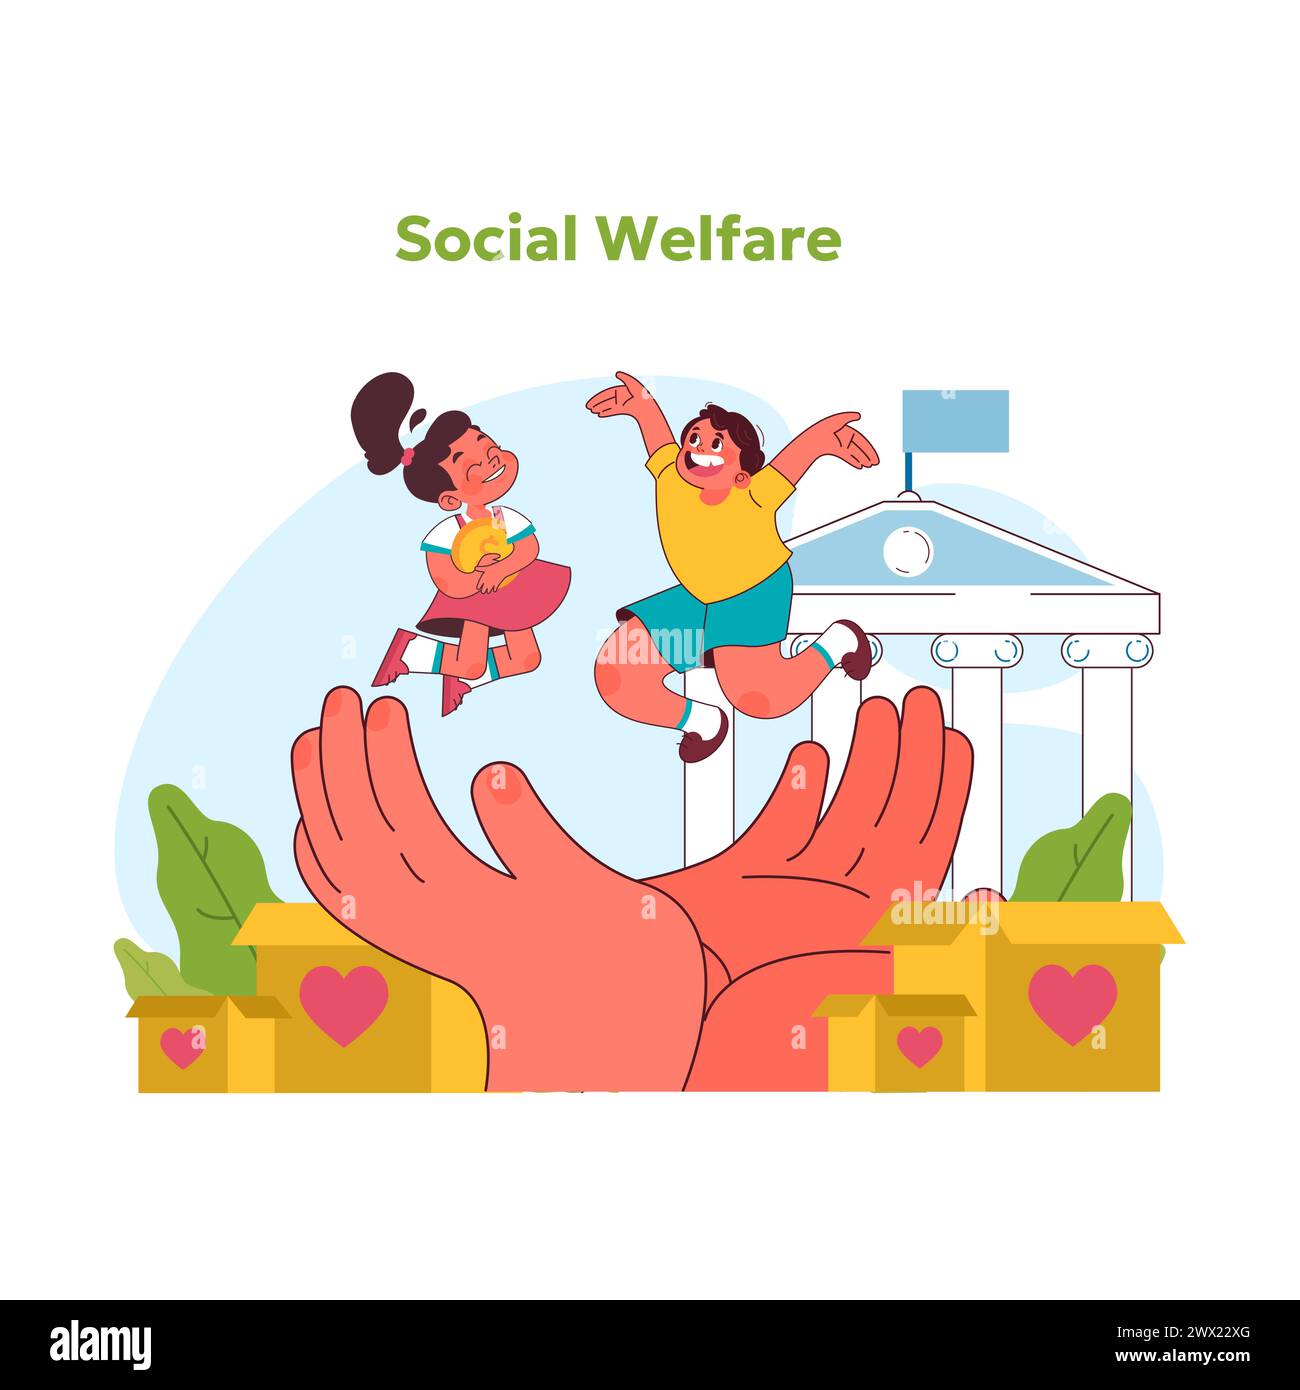 Child rights concept. Exuberant children buoyed by society support, exemplifying the spirit of communal care and social welfare. Protecting kids with government help. Vector illustration Stock Vector